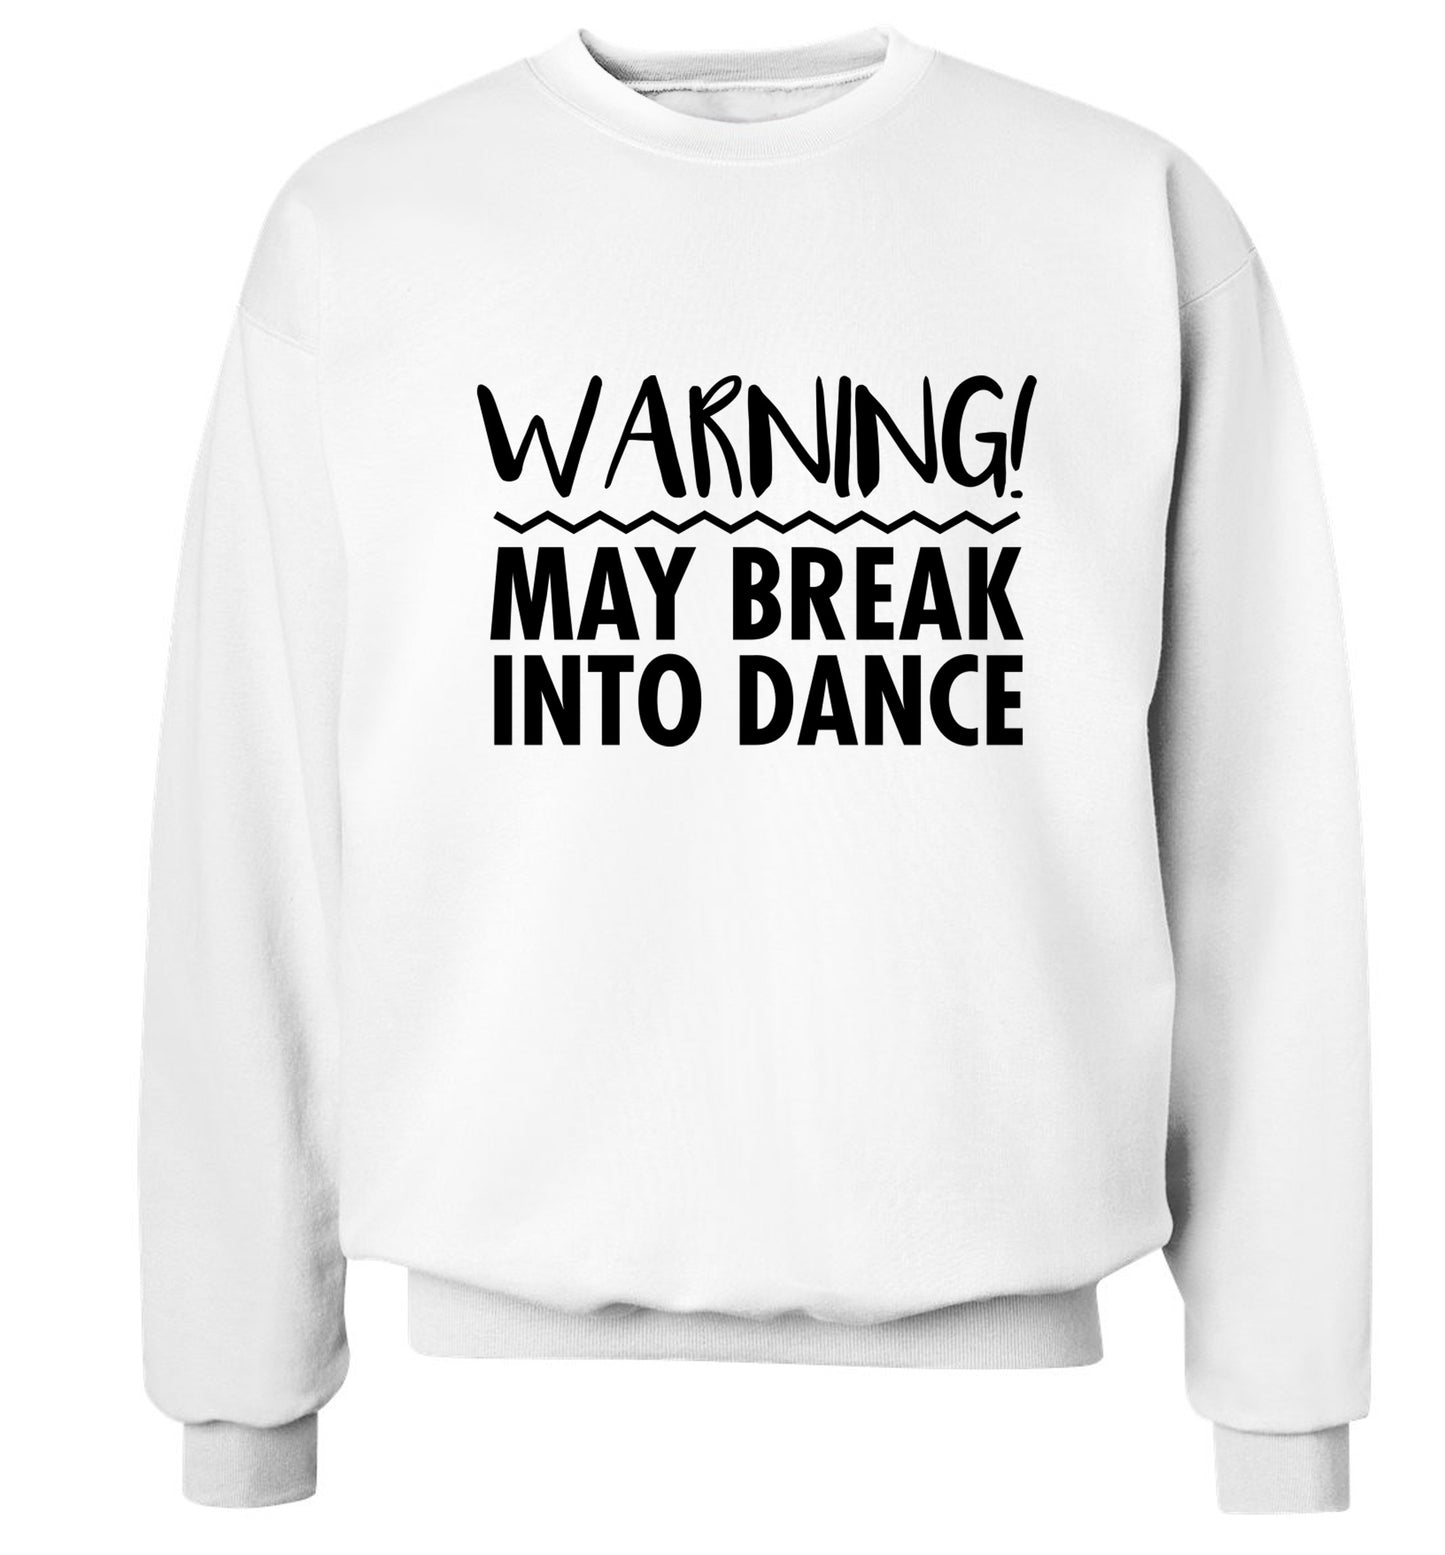 Warning may break into dance Adult's unisex white Sweater 2XL